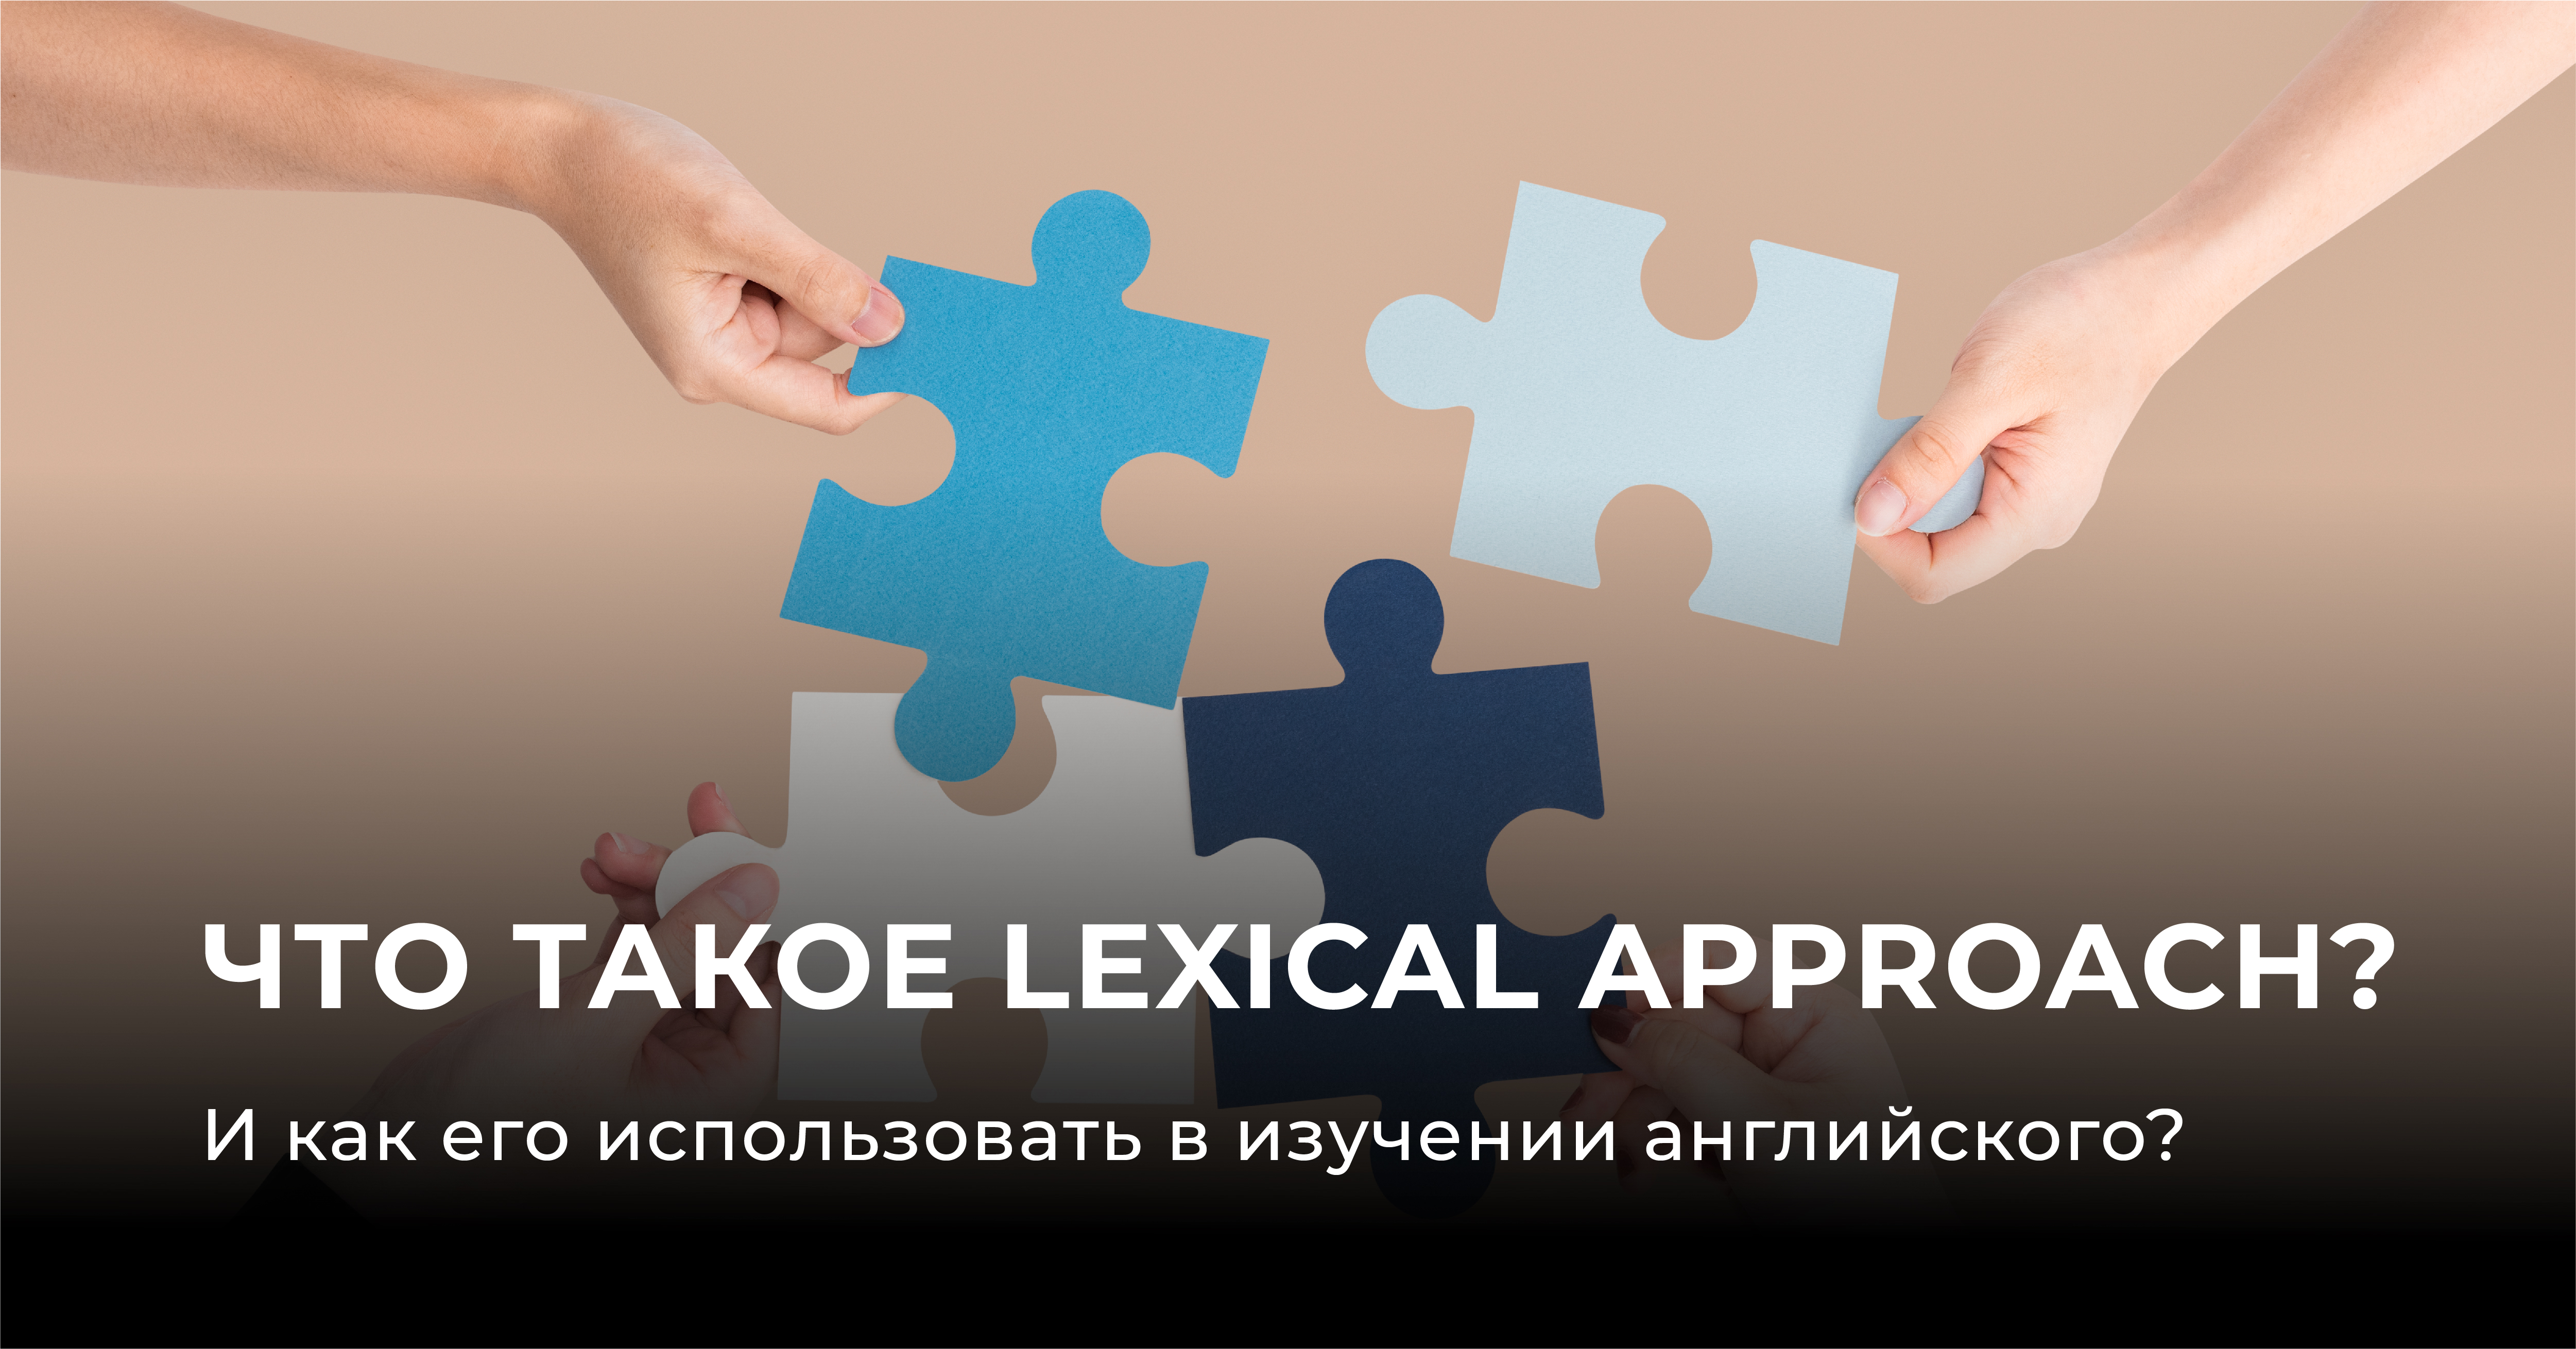 What is Lexical Approach? And how to use it in learning English?